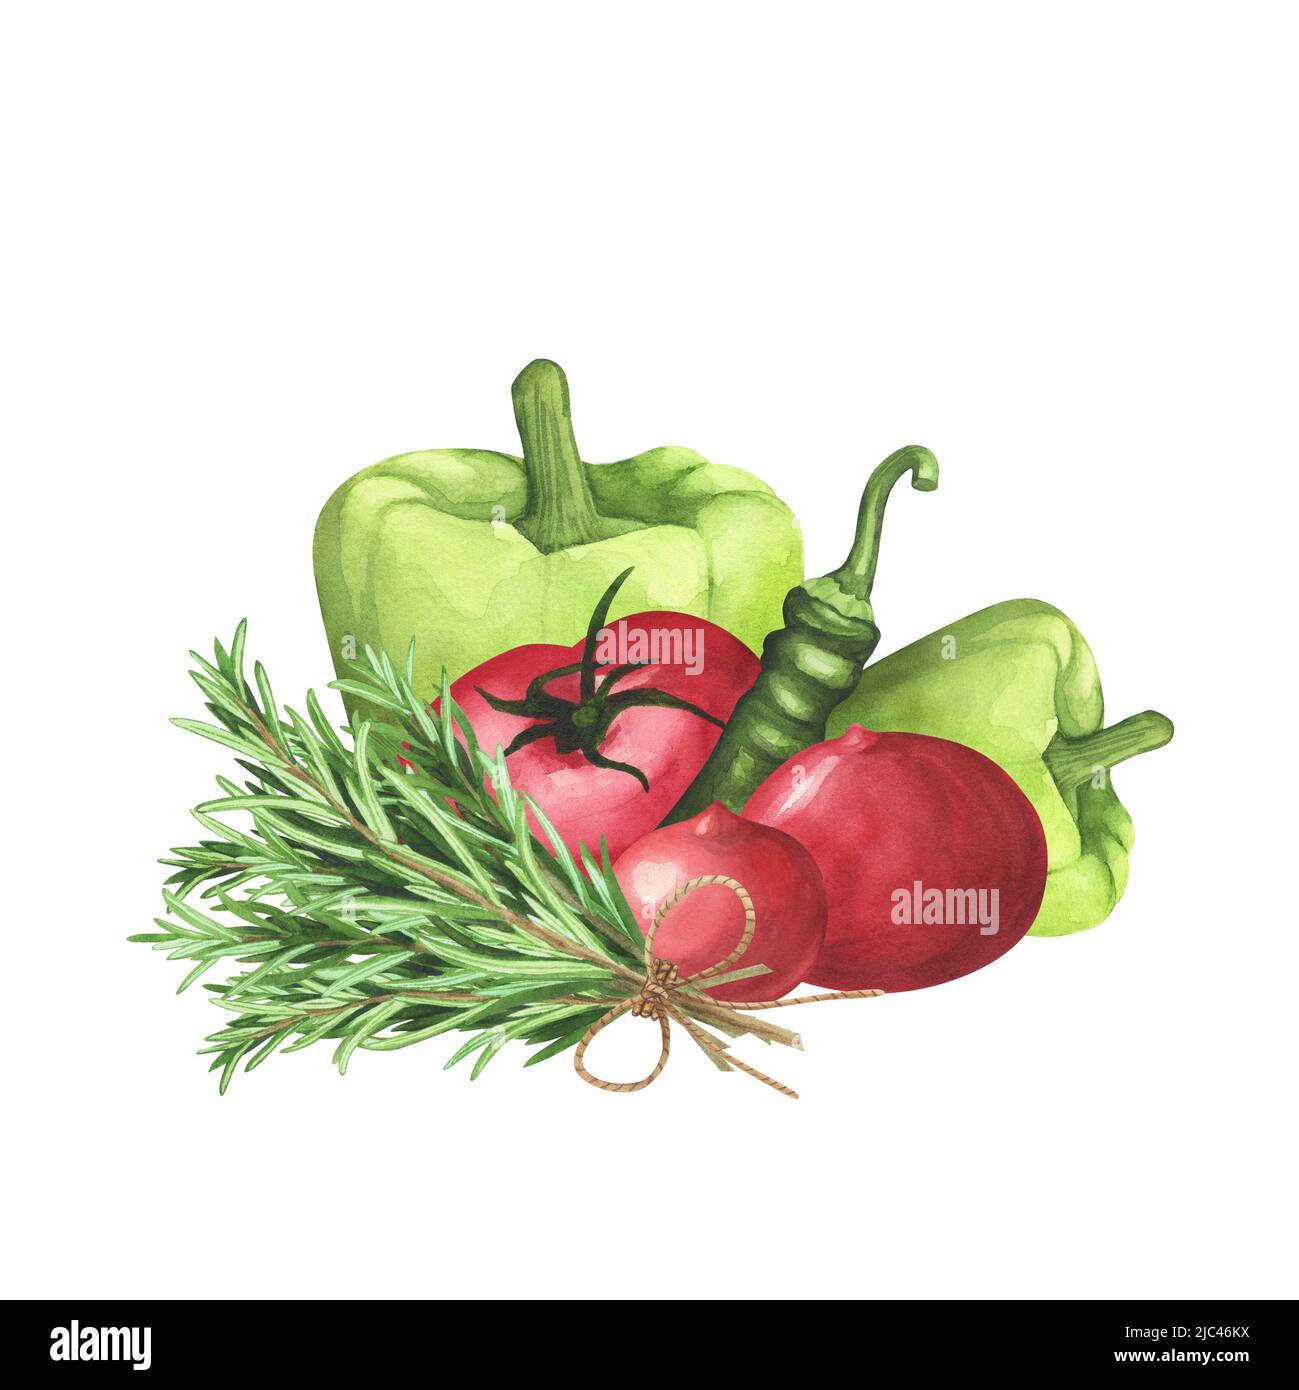 Ripe tomatoes, fresh rosemary, green bell pepper on white background. Watercolor hand drawing illustration. Art for design menu, packaging, organic pr Stock Photo